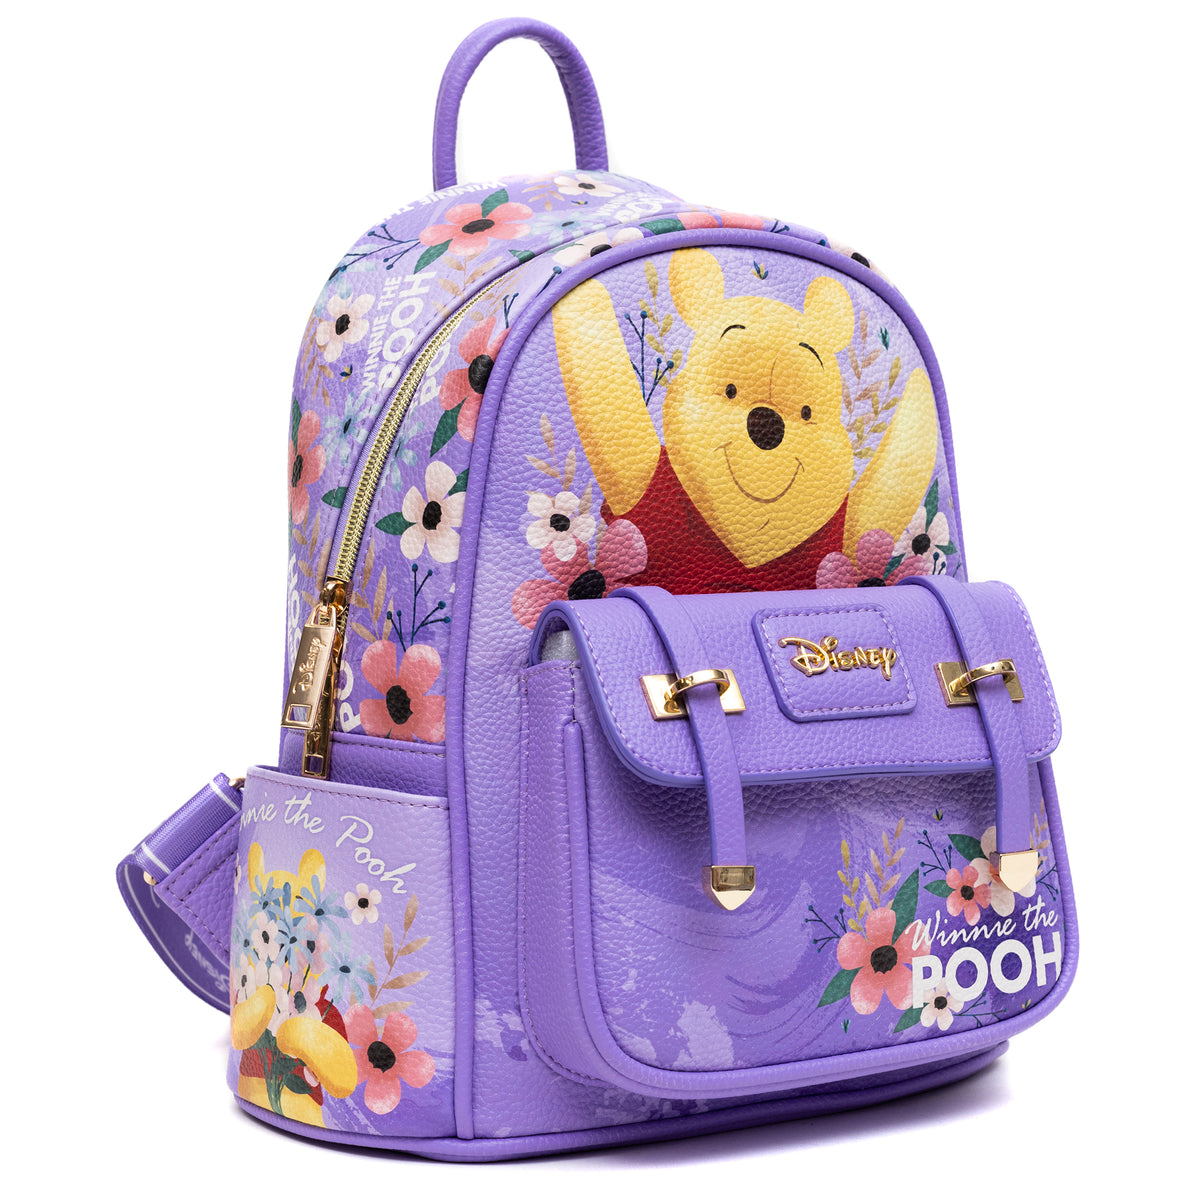 Disney Winnie the Pooh Mini Backpack - Limited Edition